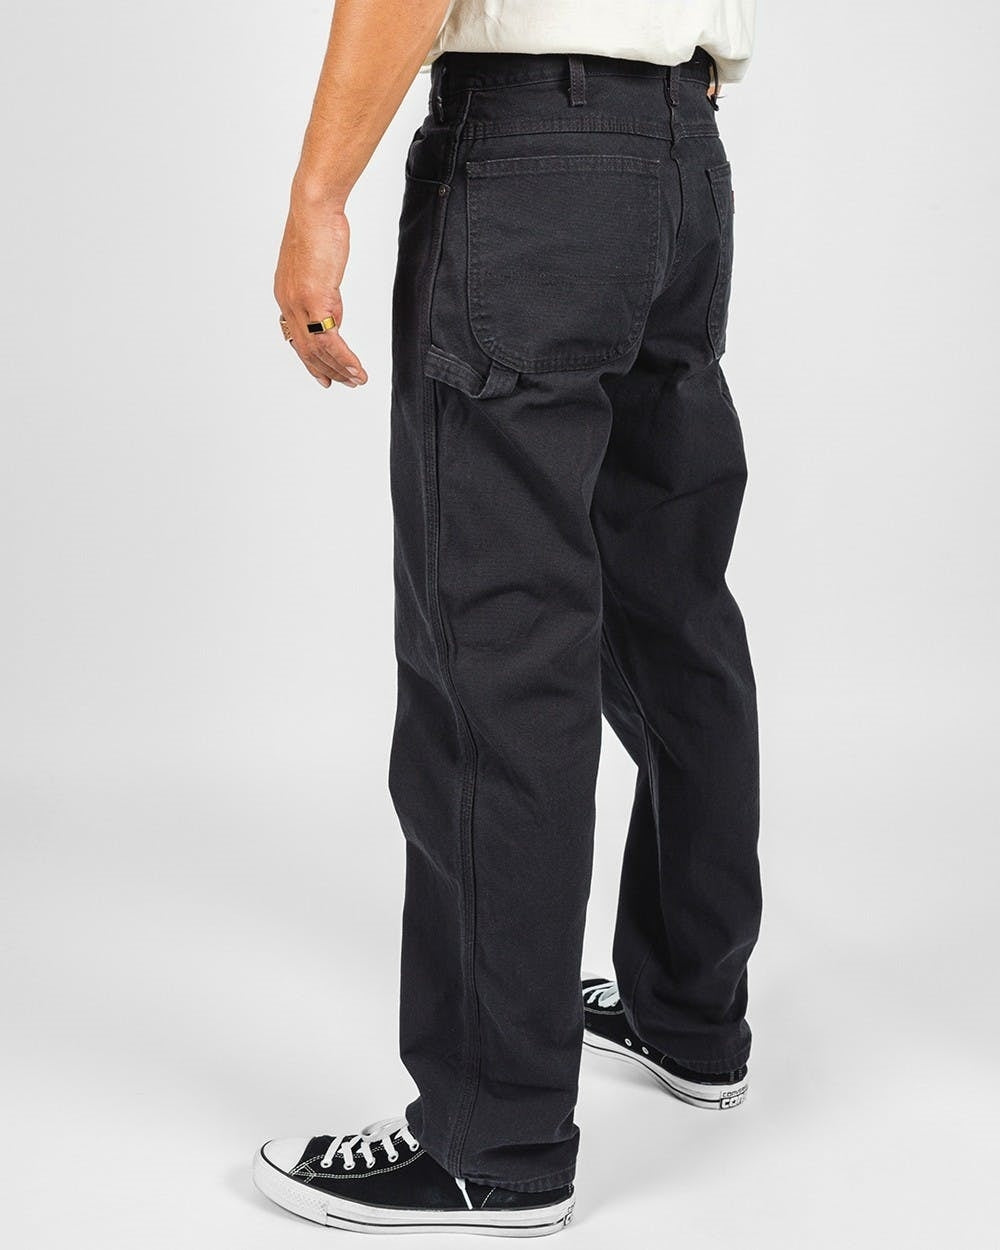 Dickies Men's Relaxed Fit Straight-Leg Duck Carpenter Jean, Black, 30W x  30L at  Men's Clothing store